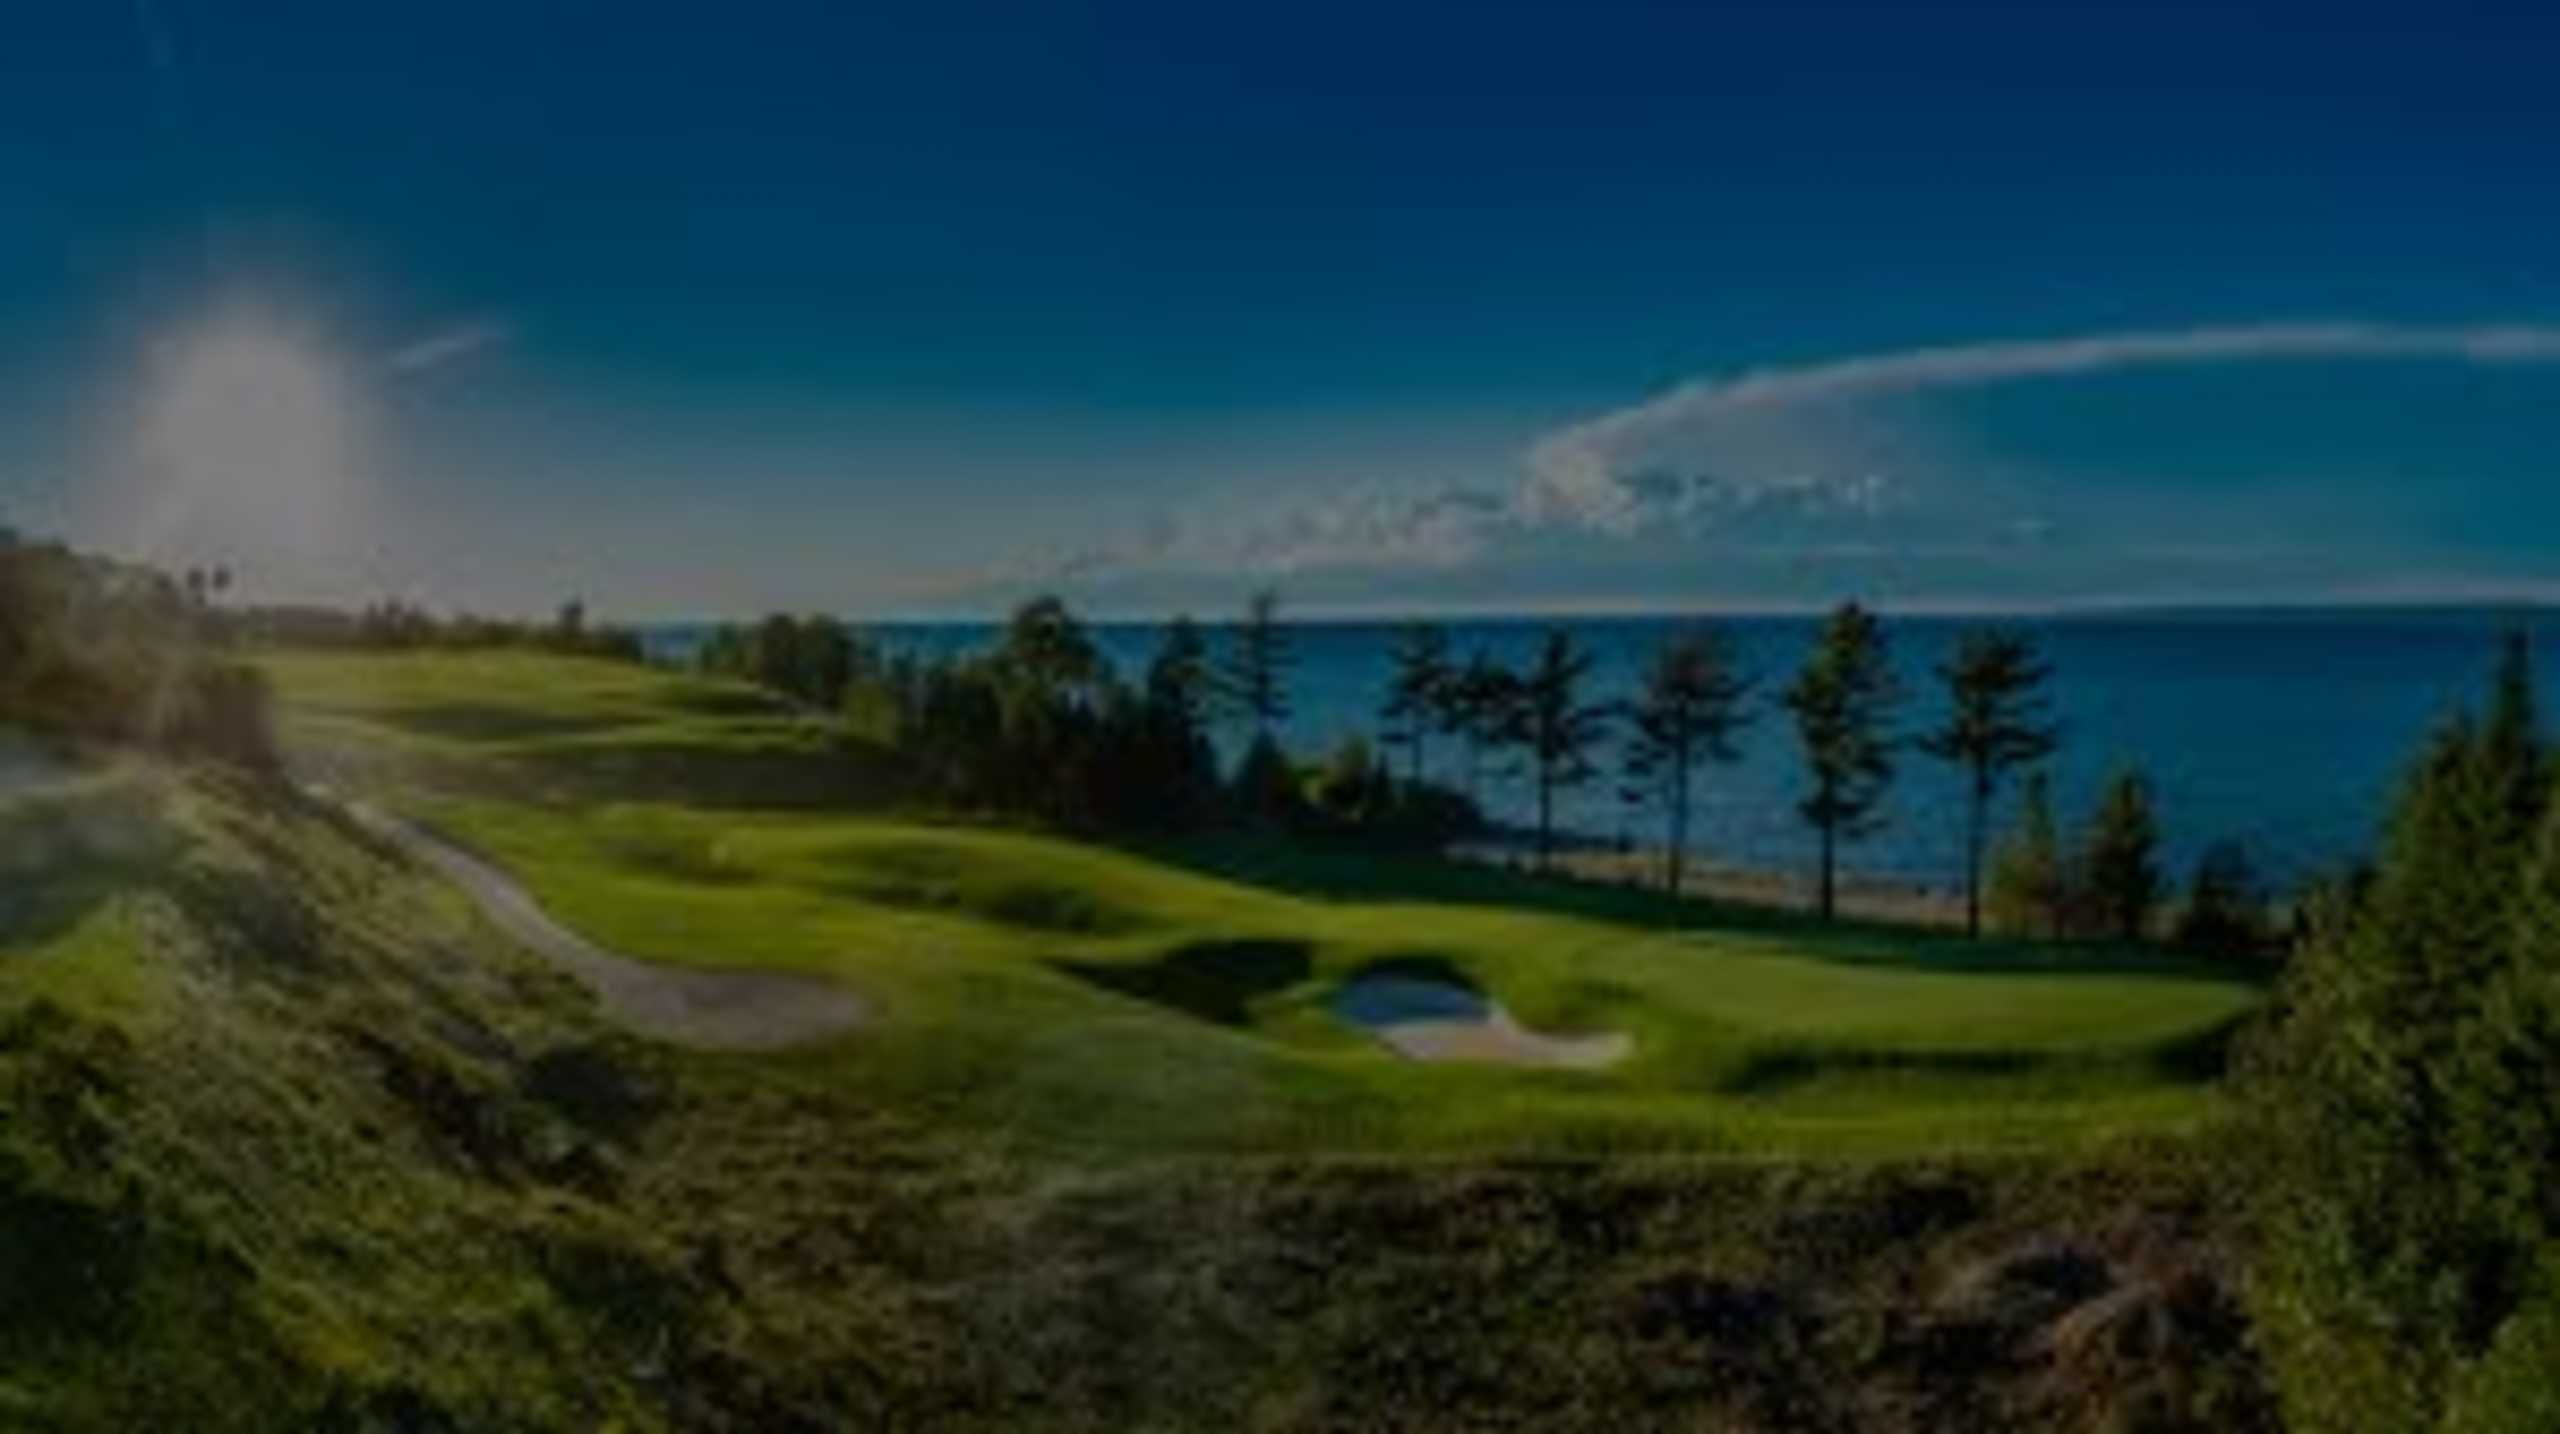 Northern Michigan is home to some of the nation's most exquisite golf courses, Including Bay Harbor